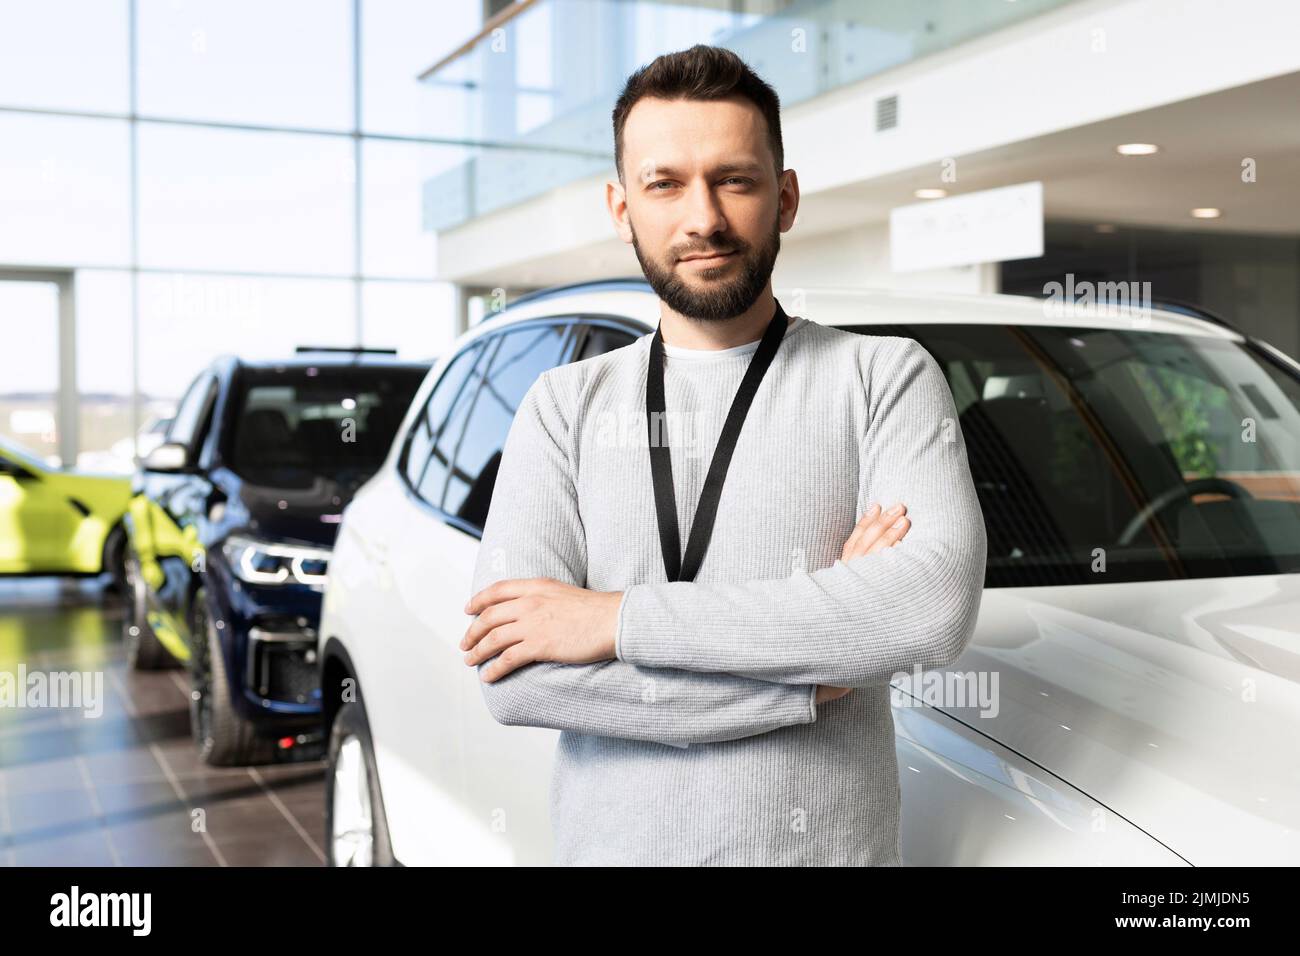 Car dealership worker next to a new car looking at the camera with a smile Stock Photo